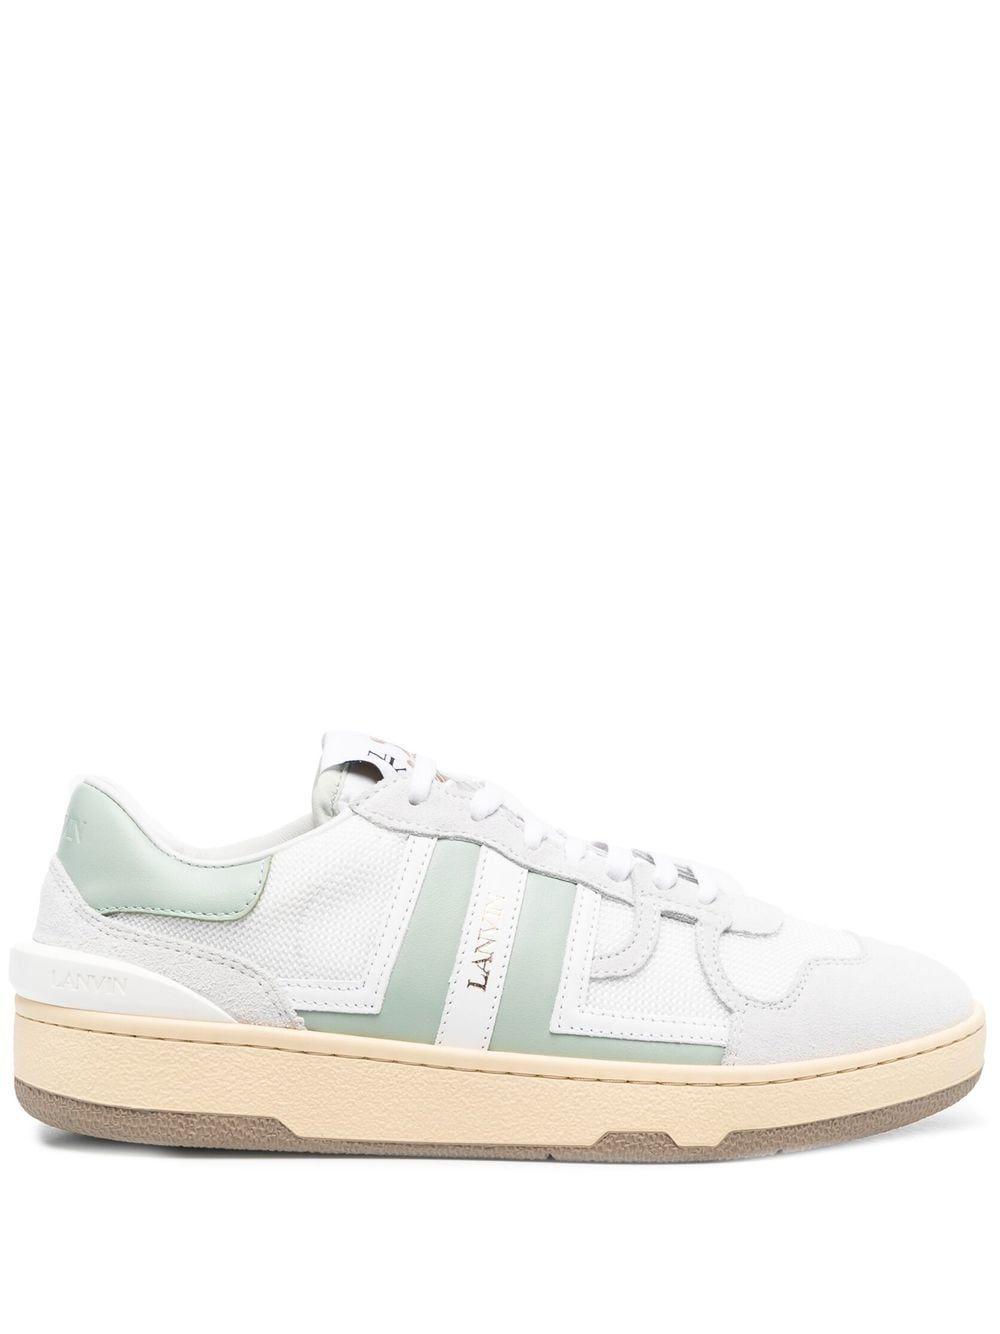 Lanvin White Leather Clay Sneakers | Lyst